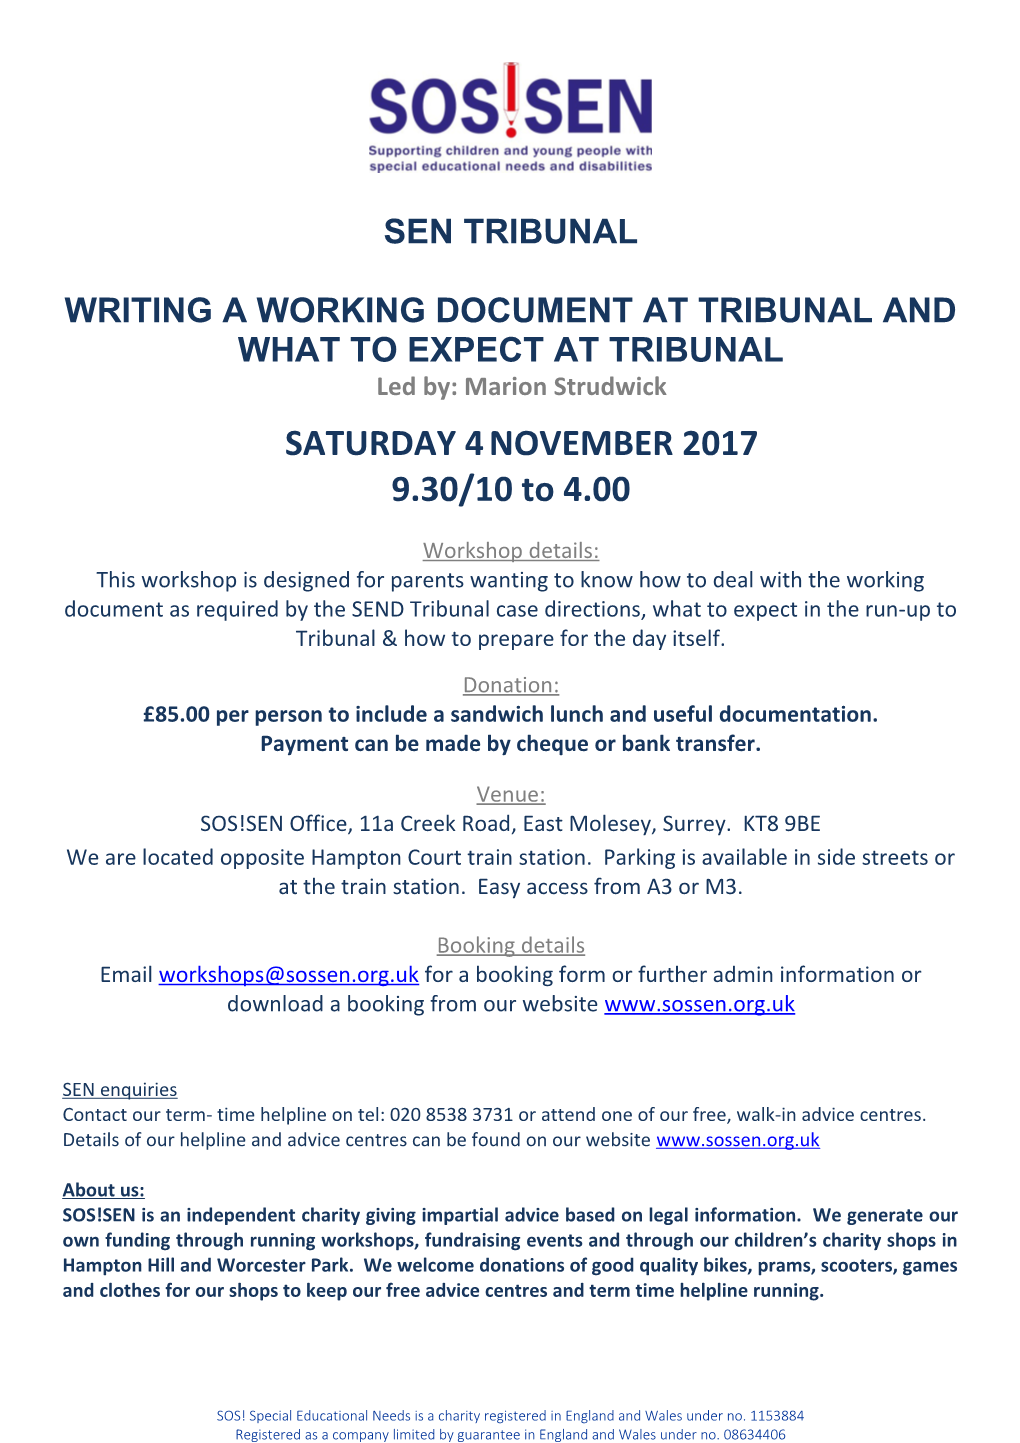 Writing a Working Document at Tribunal and What to Expect at Tribunal